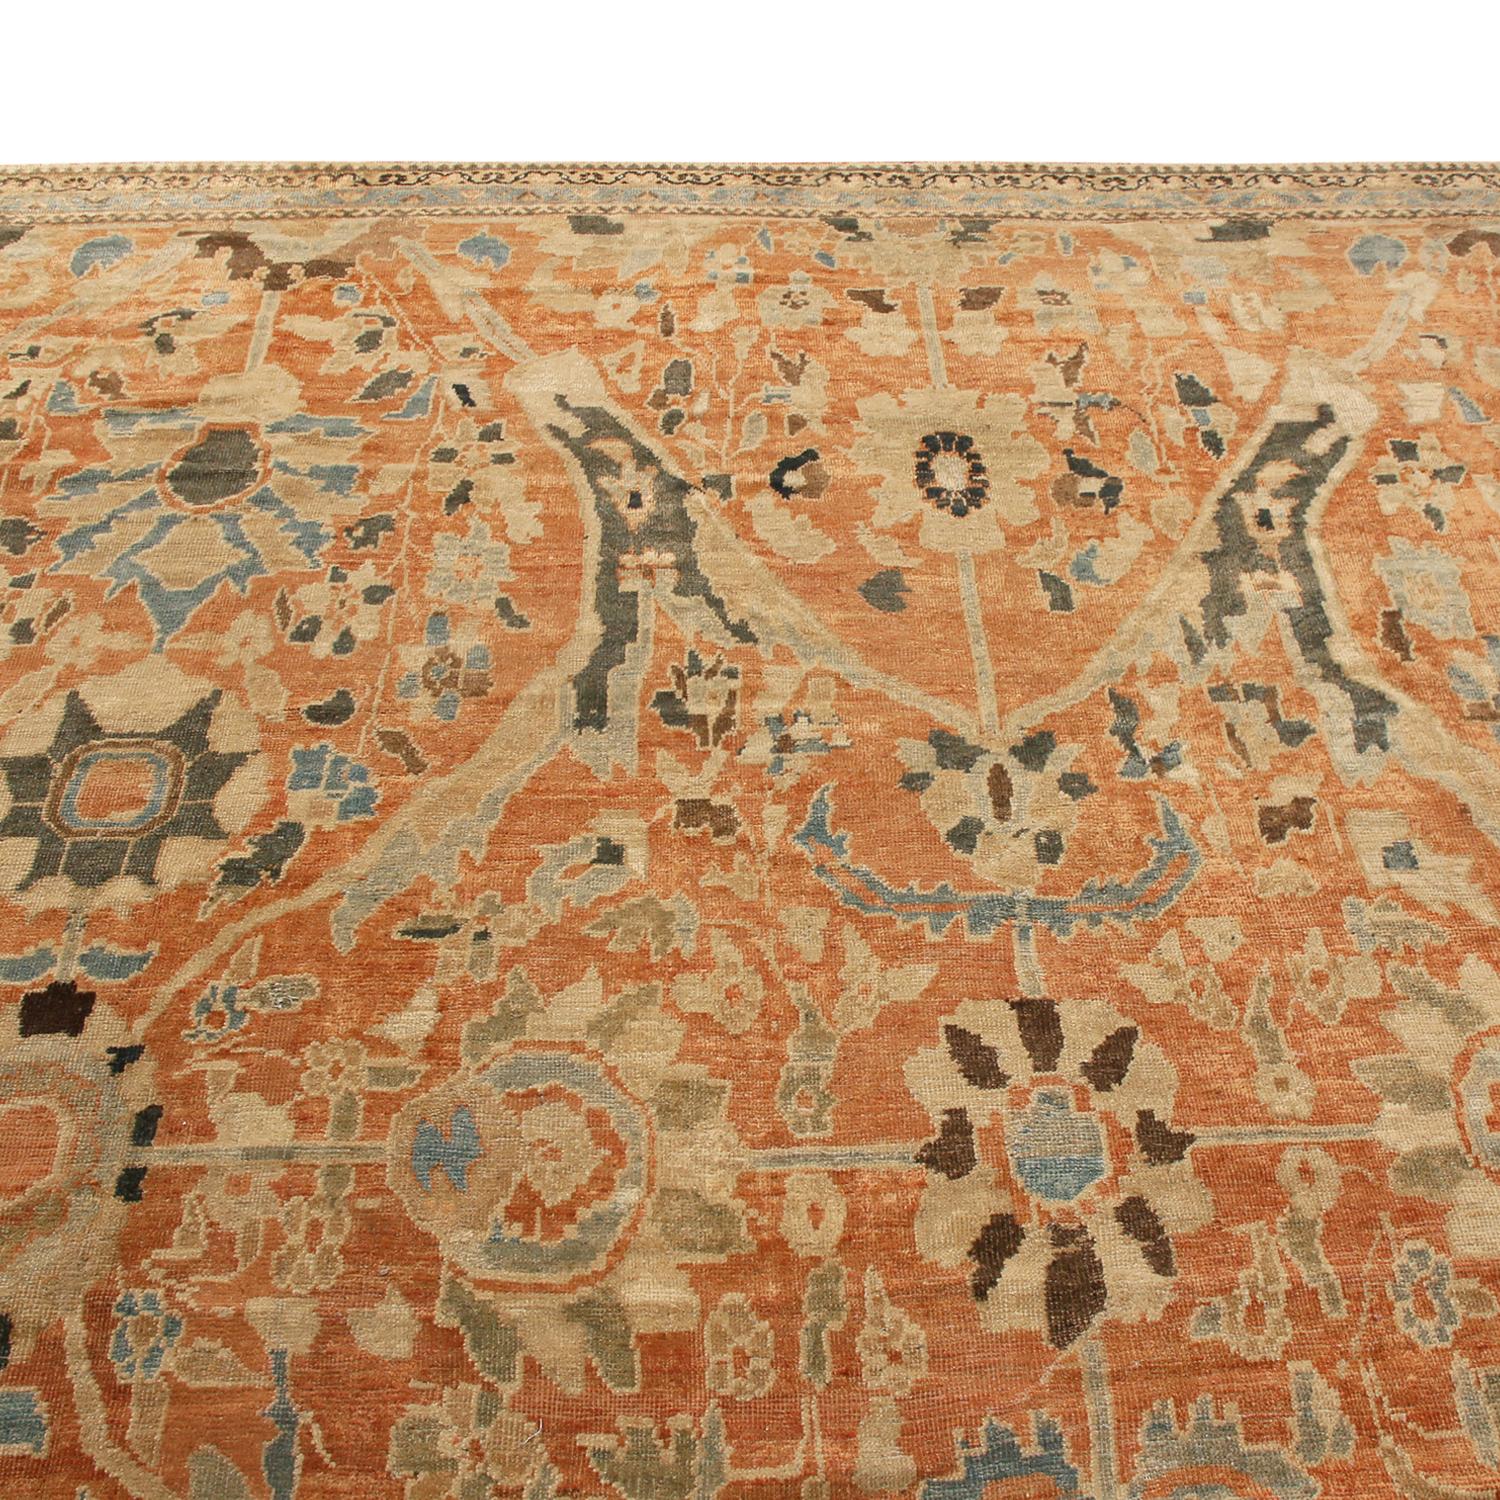 Hand knotted in high-quality wool originating from Persia between 1880-1890, this antique Sultanabad Persian rug lends spacious warmth and elegance to a space, enjoying a rich combination of vibrant orange, regal navy blue, and beige colorways